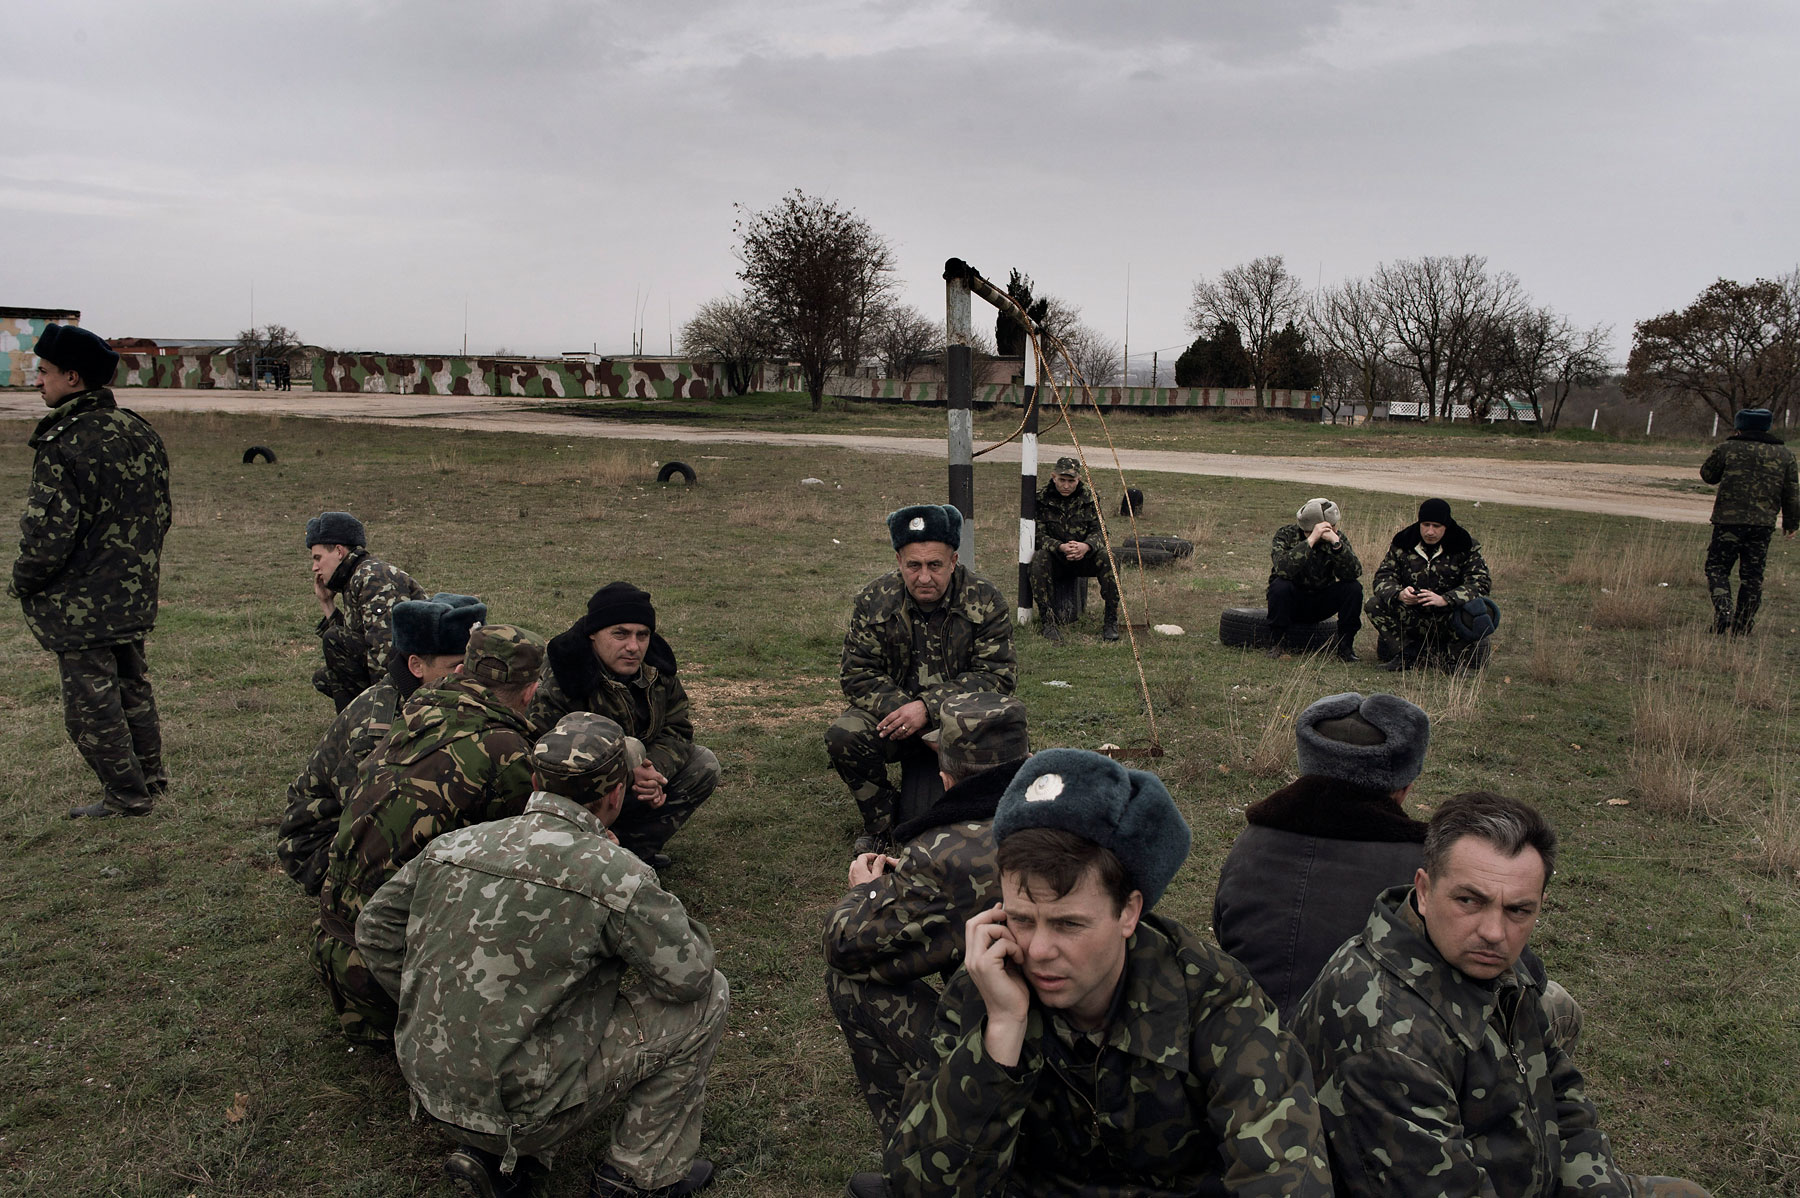 Ukrainian soldiers at the Belbek air force base in Crimea, March 4, 2014.